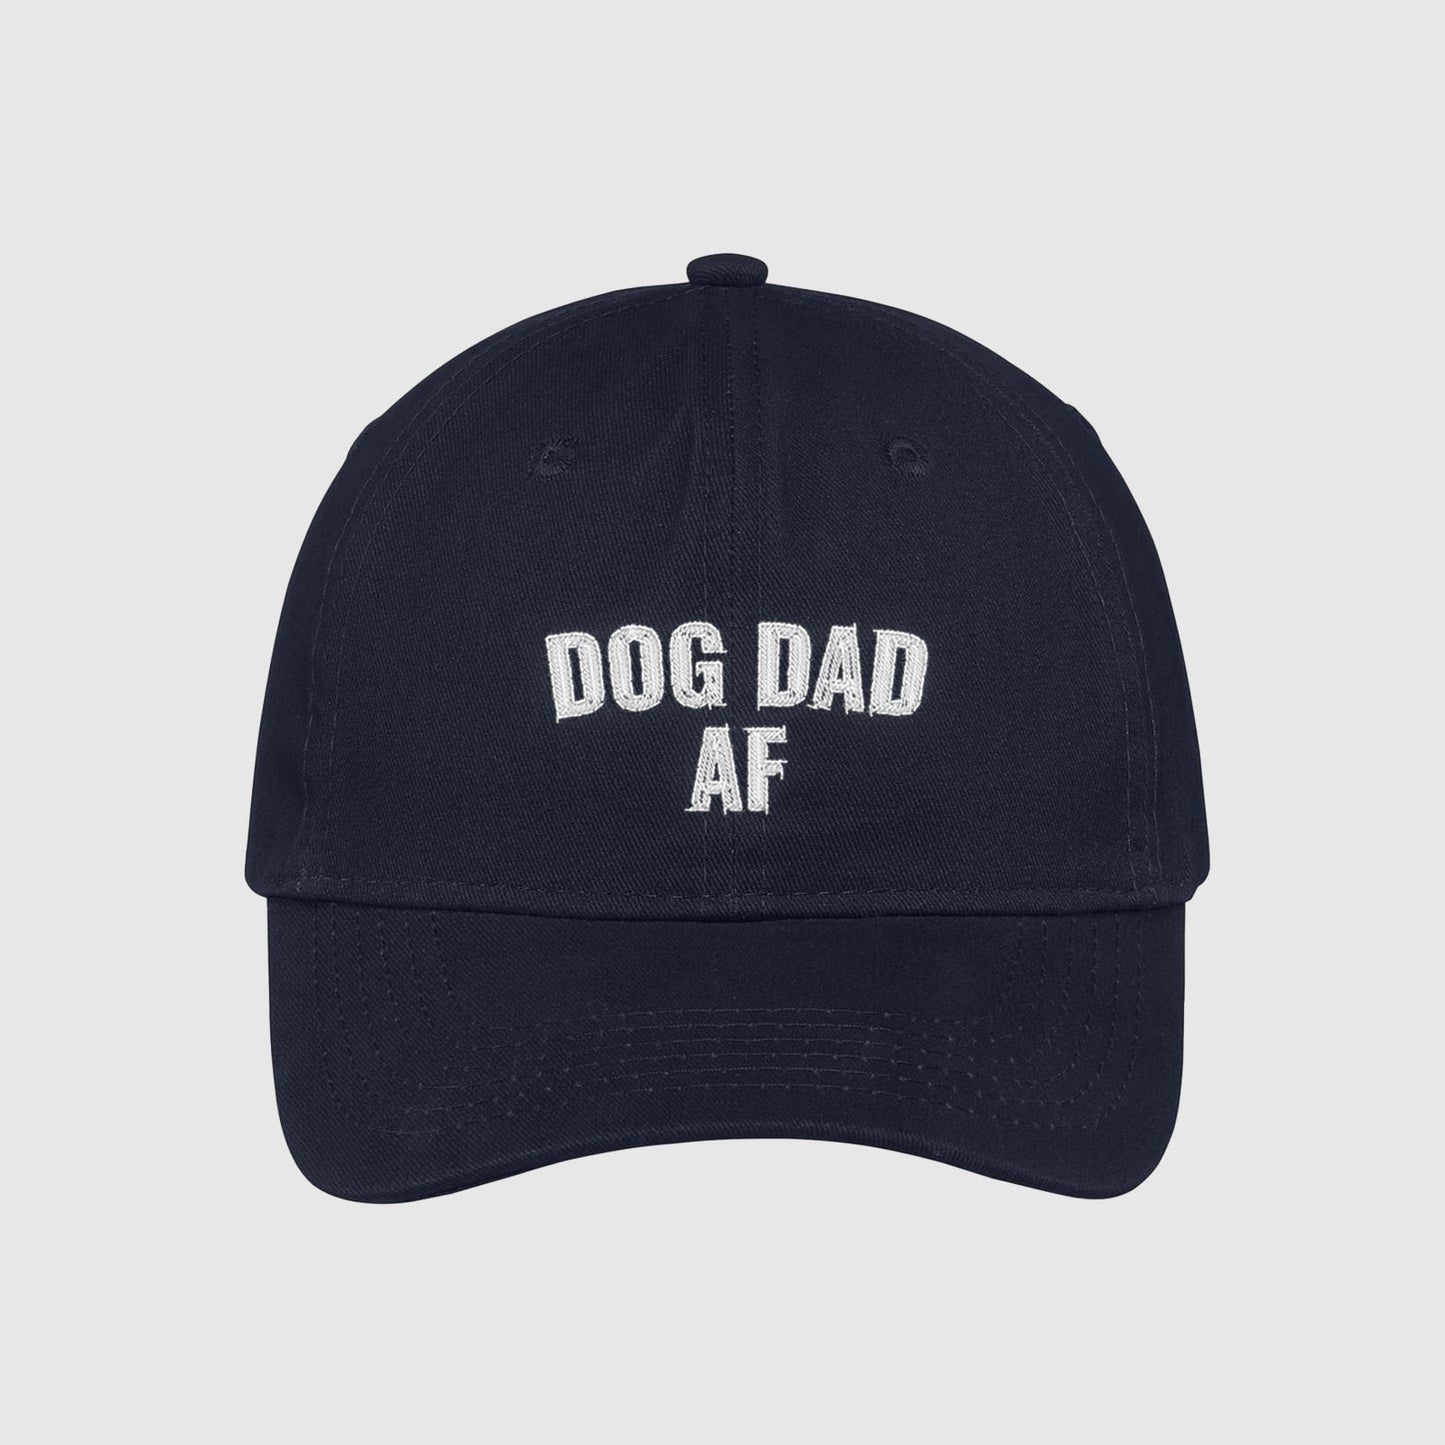 Navy Dog Dad AF Hat embroidered with white text